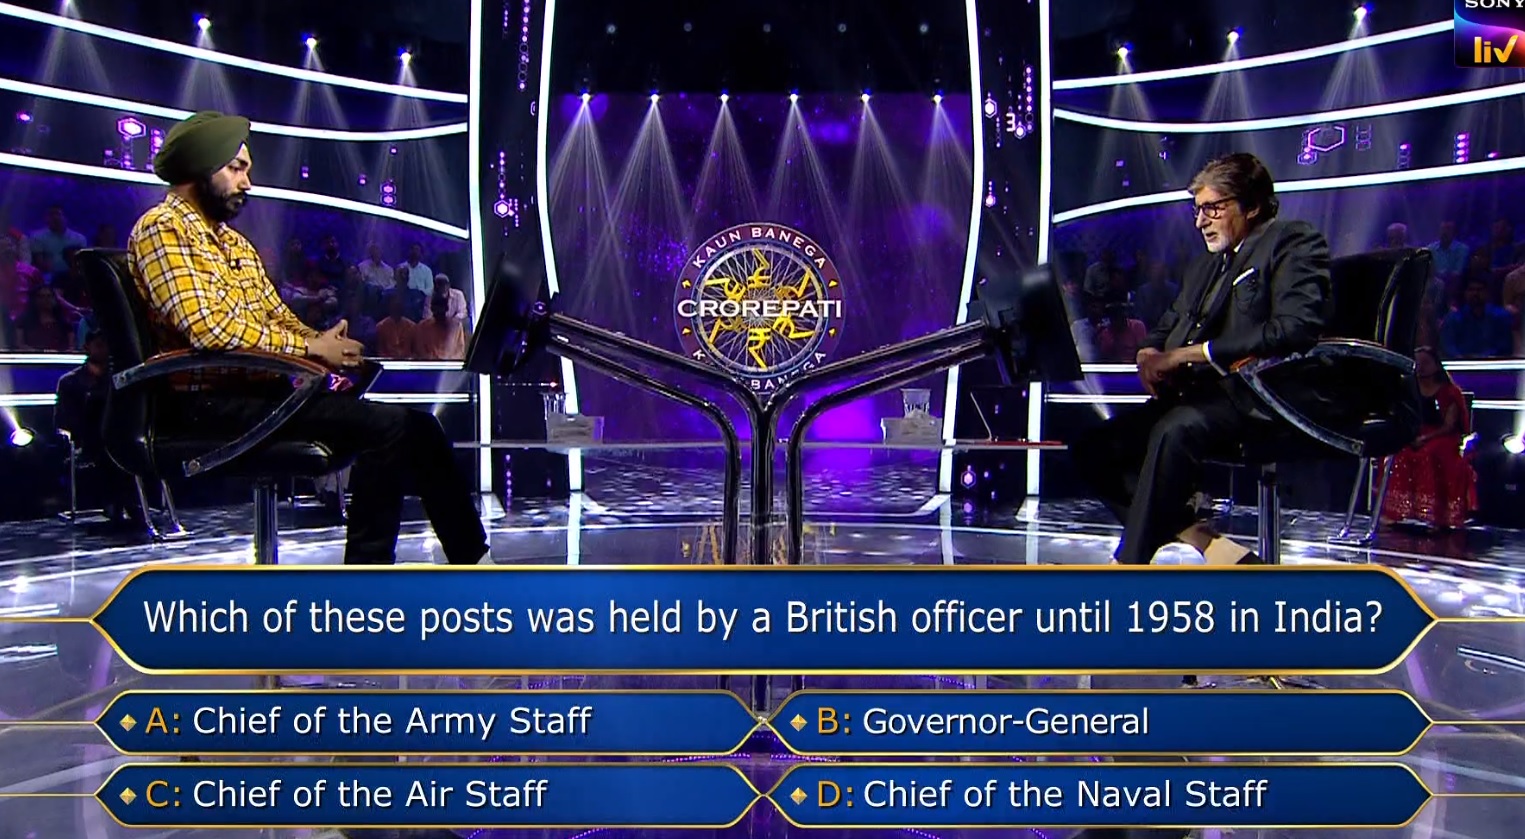 Ques : Which of these posts was held by a British officer until 1958 in India?